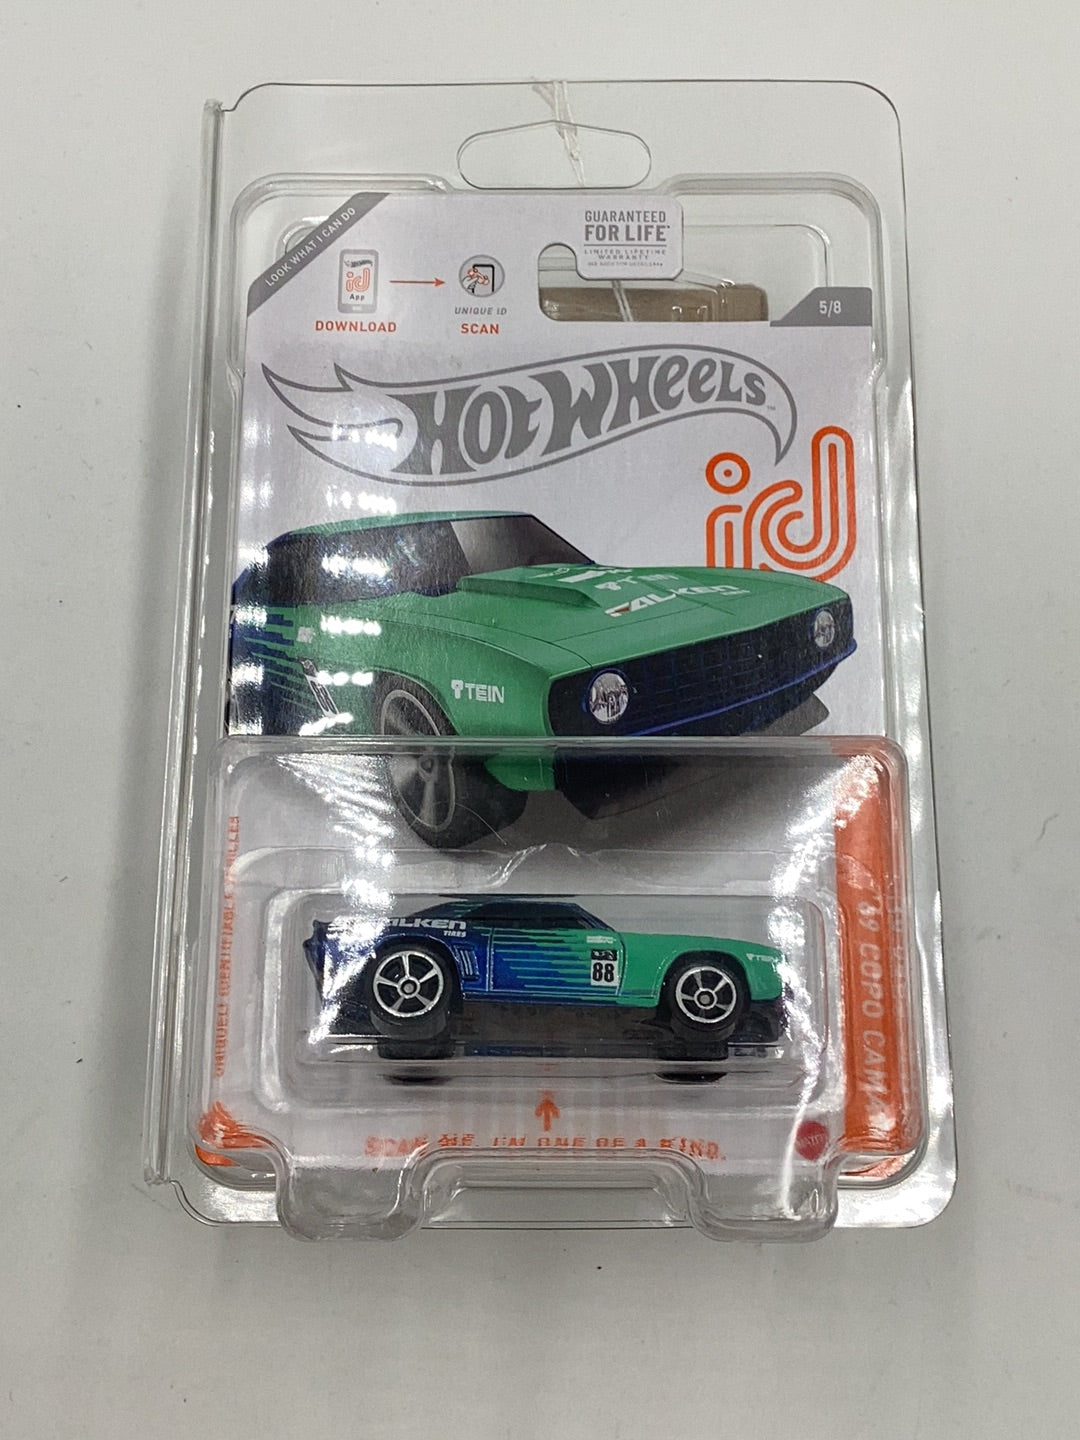 2021 Hot Wheels ID #5 69 Copo Camaro chase Falken 5/8 with protector